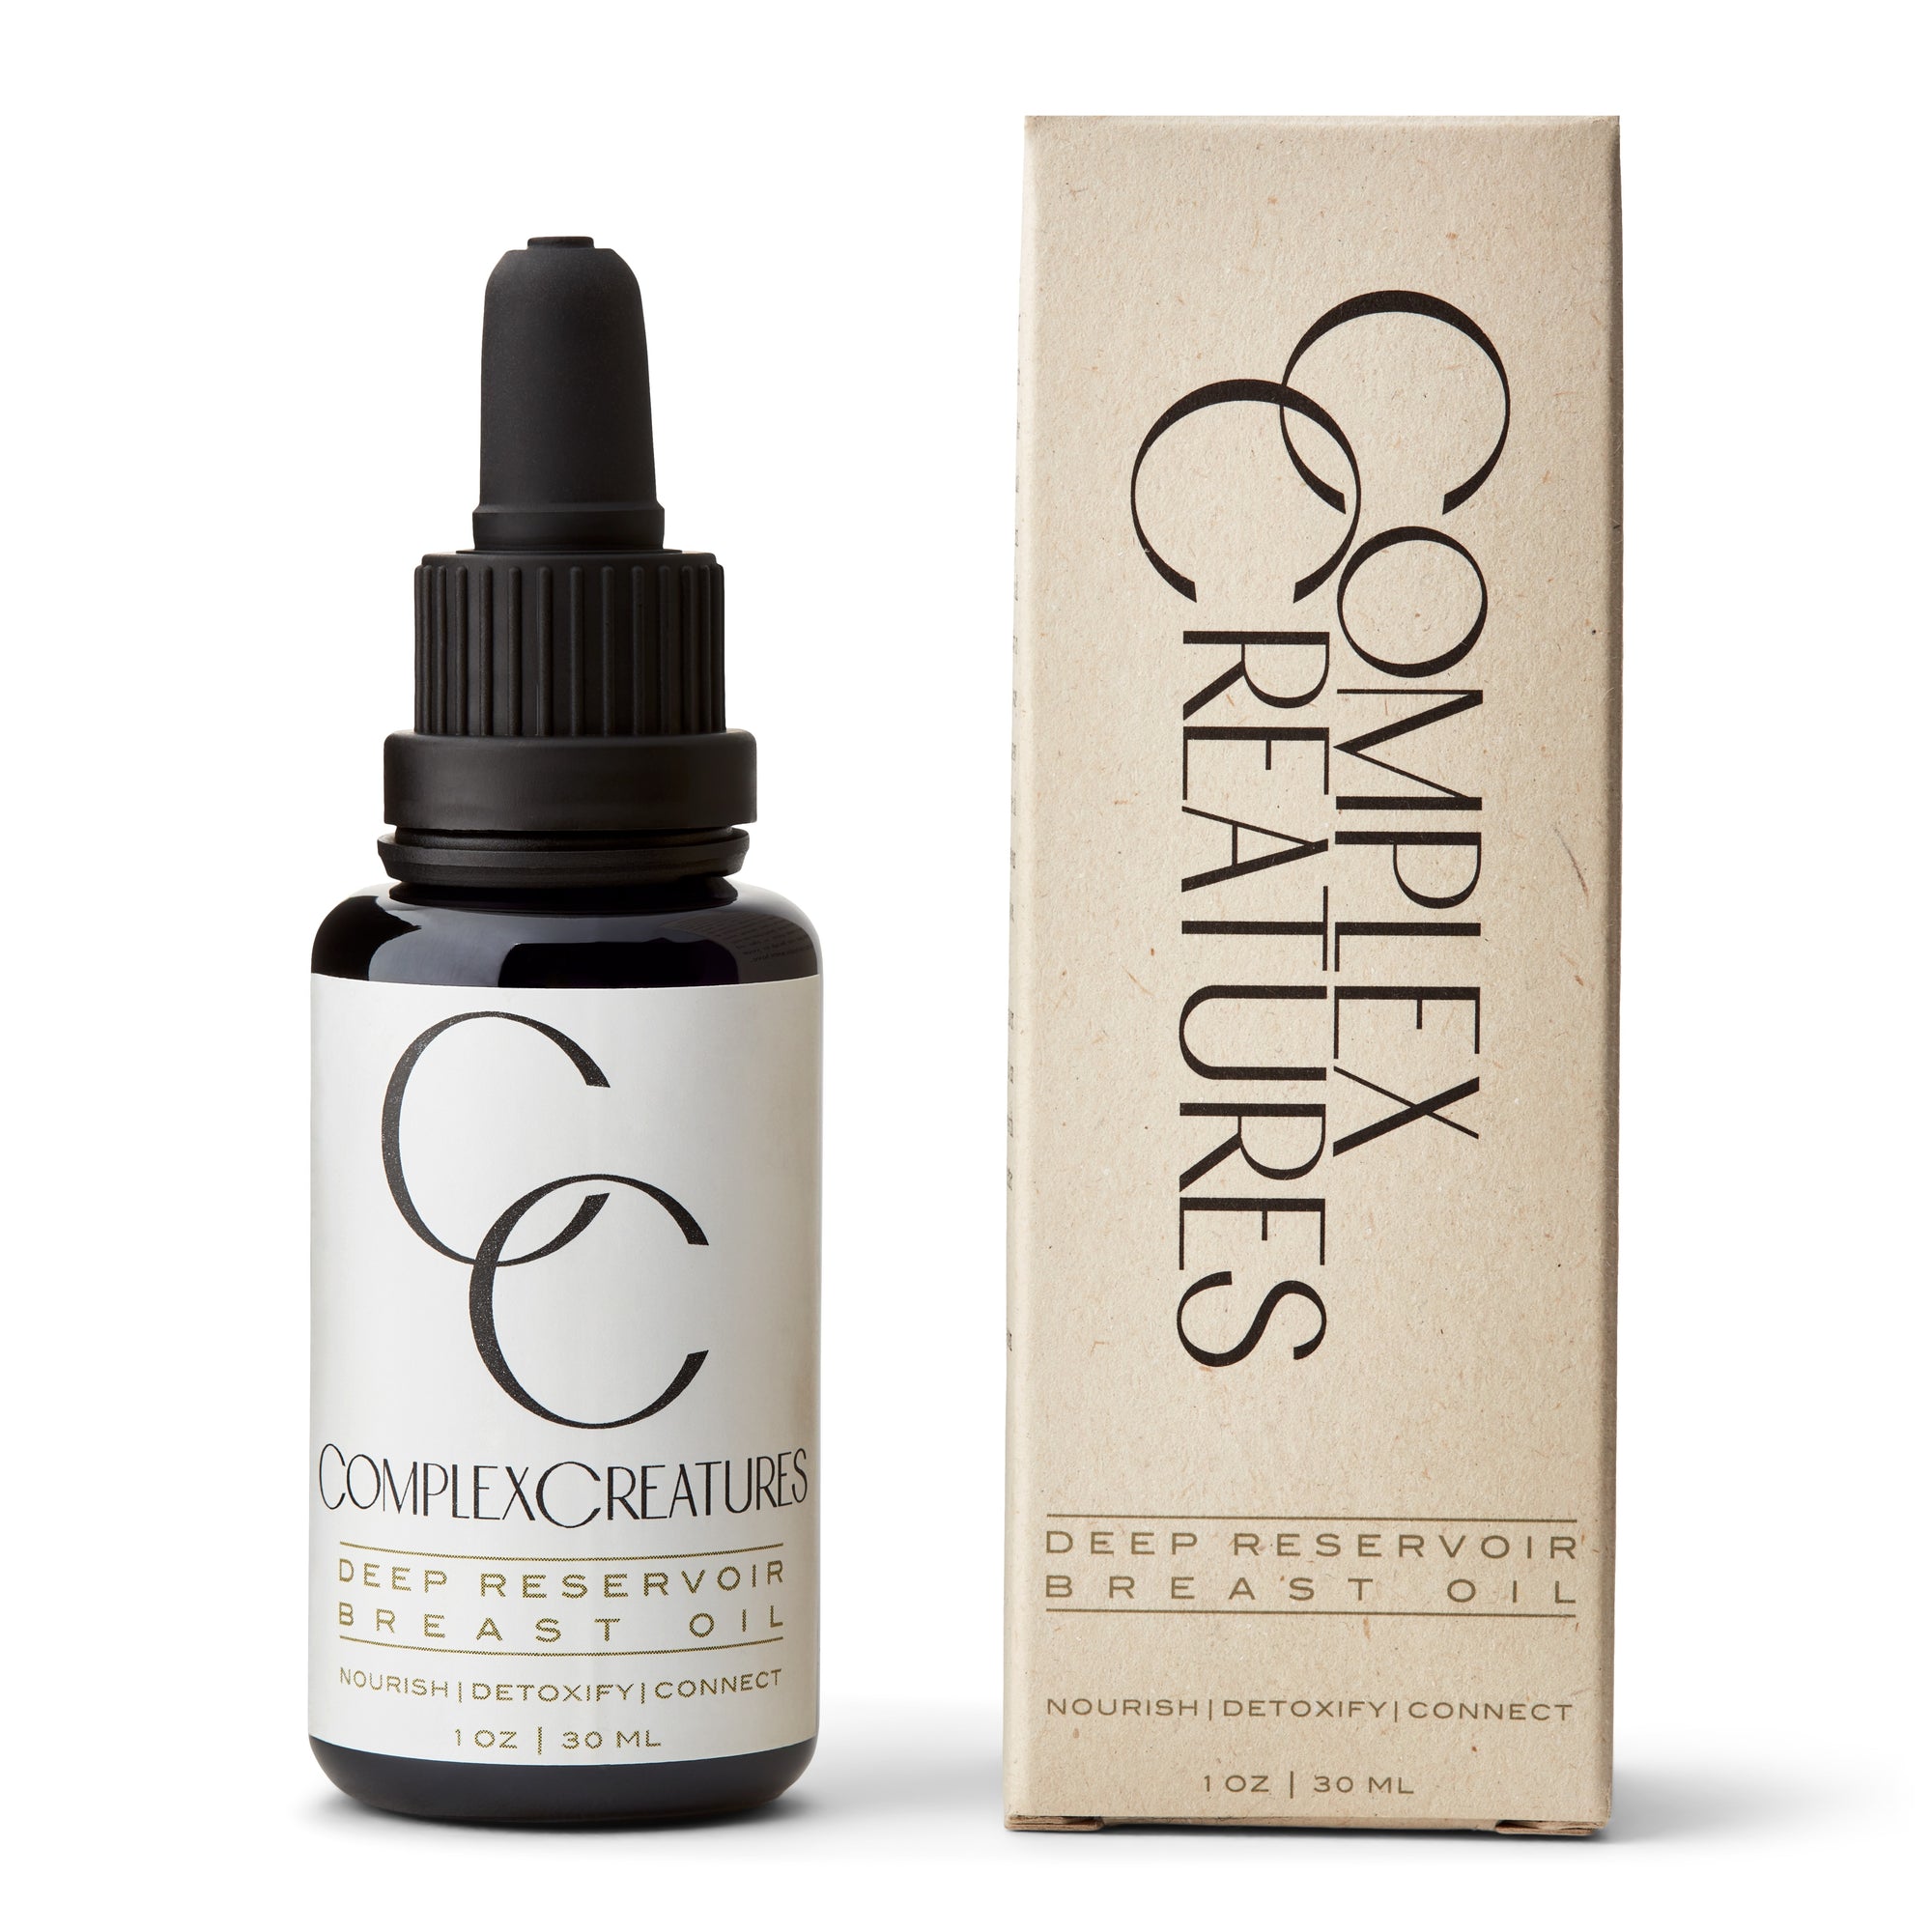 Bottle and Box of Complex Creatures Deep Reservoir Breast Oil